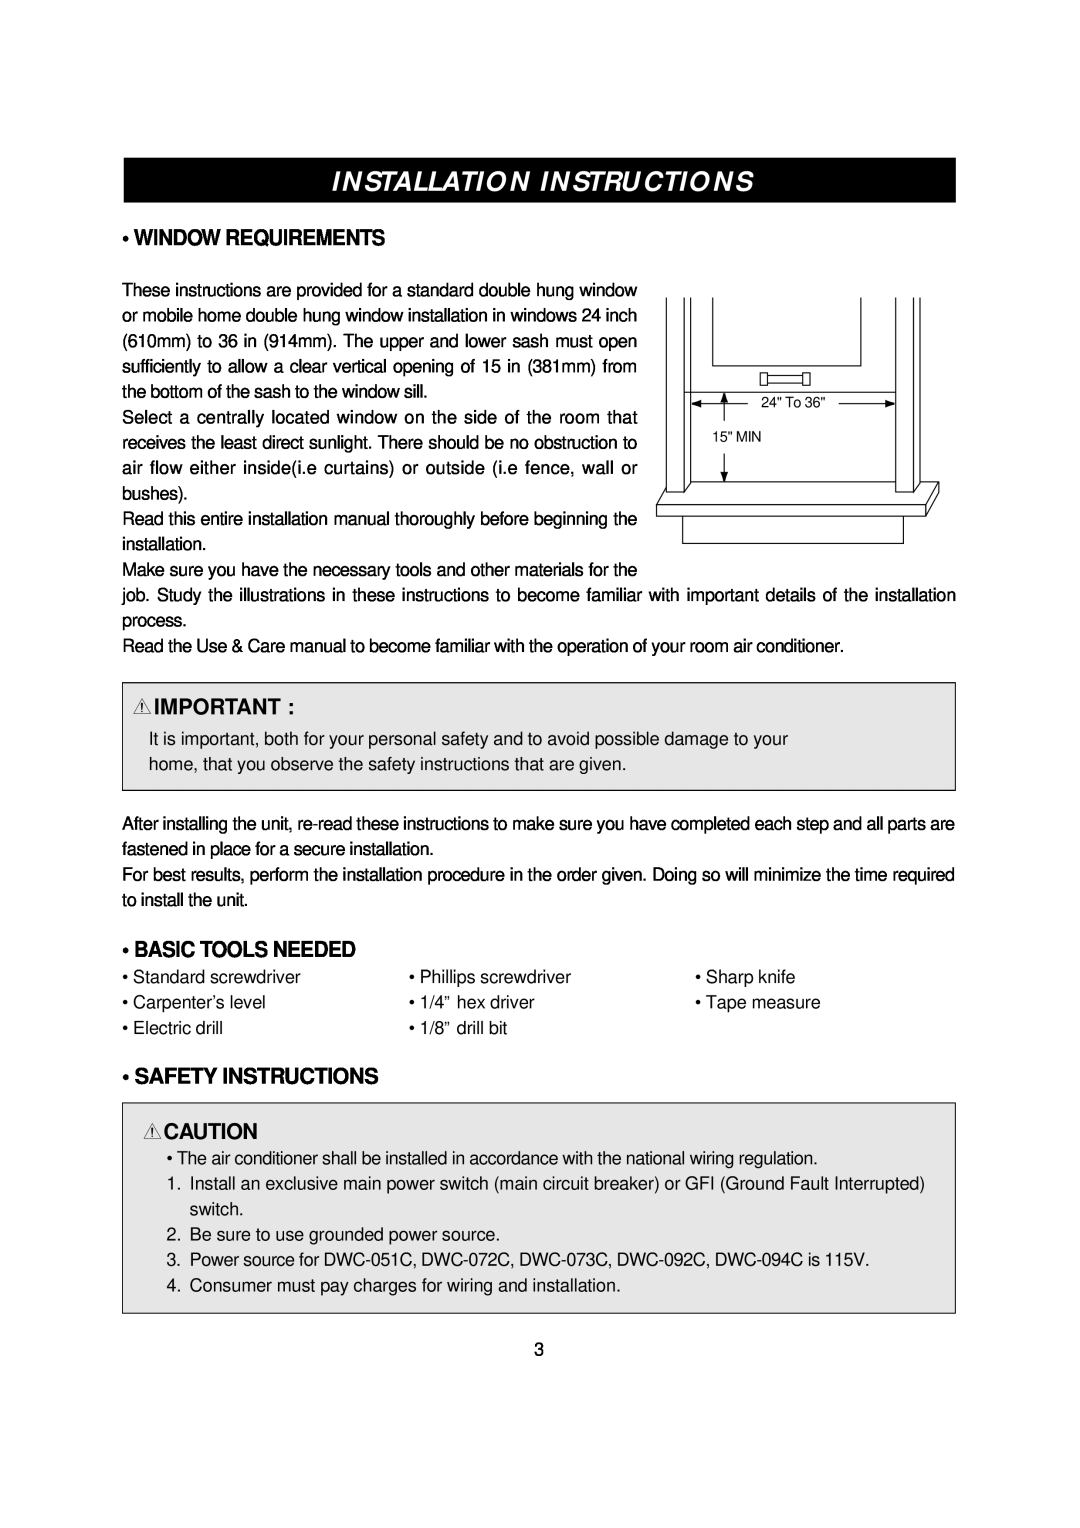 Daewoo DWC-072C, DWC-094C, DWC-092C Installation Instructions, Window Requirements, Basic Tools Needed, Safety Instructions 